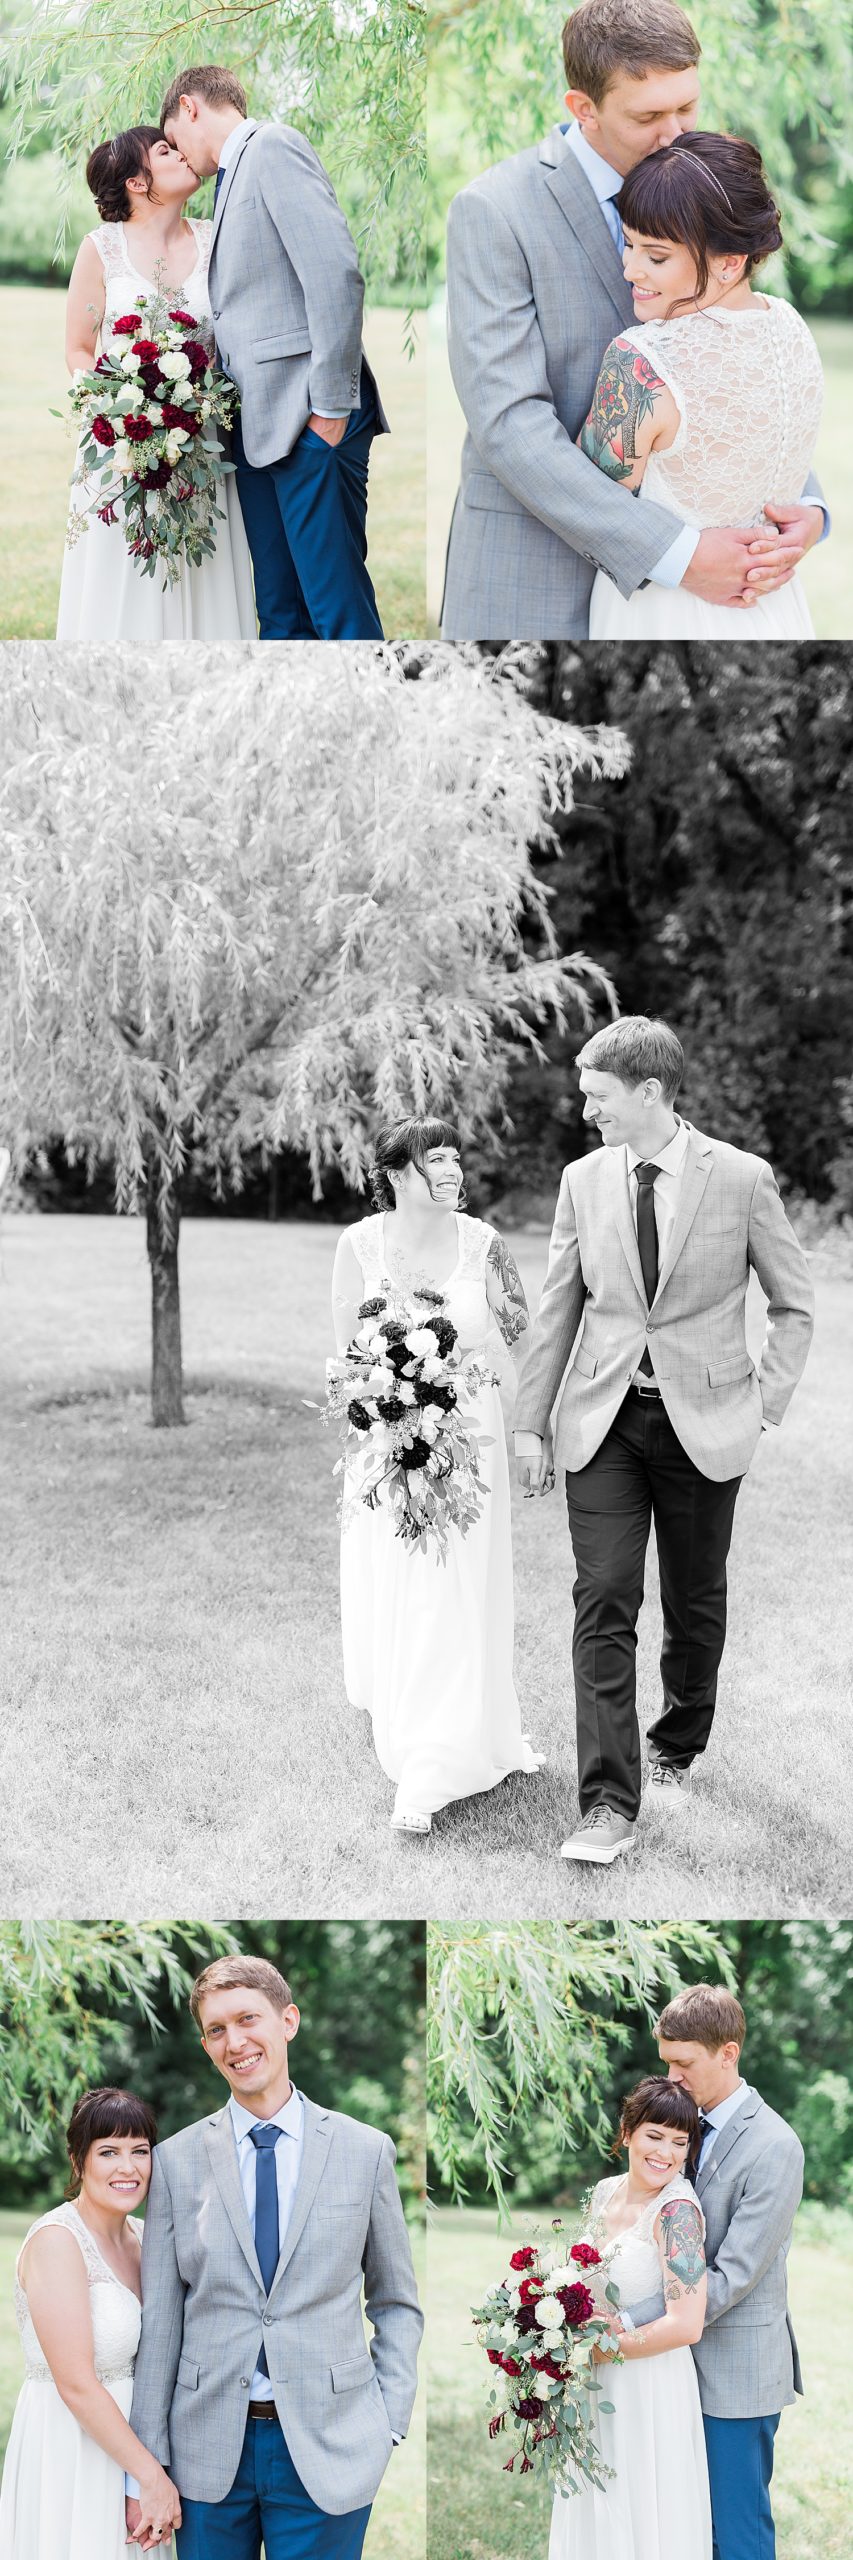 bride holding floral wedding bouquet with groom walking along vineyard 